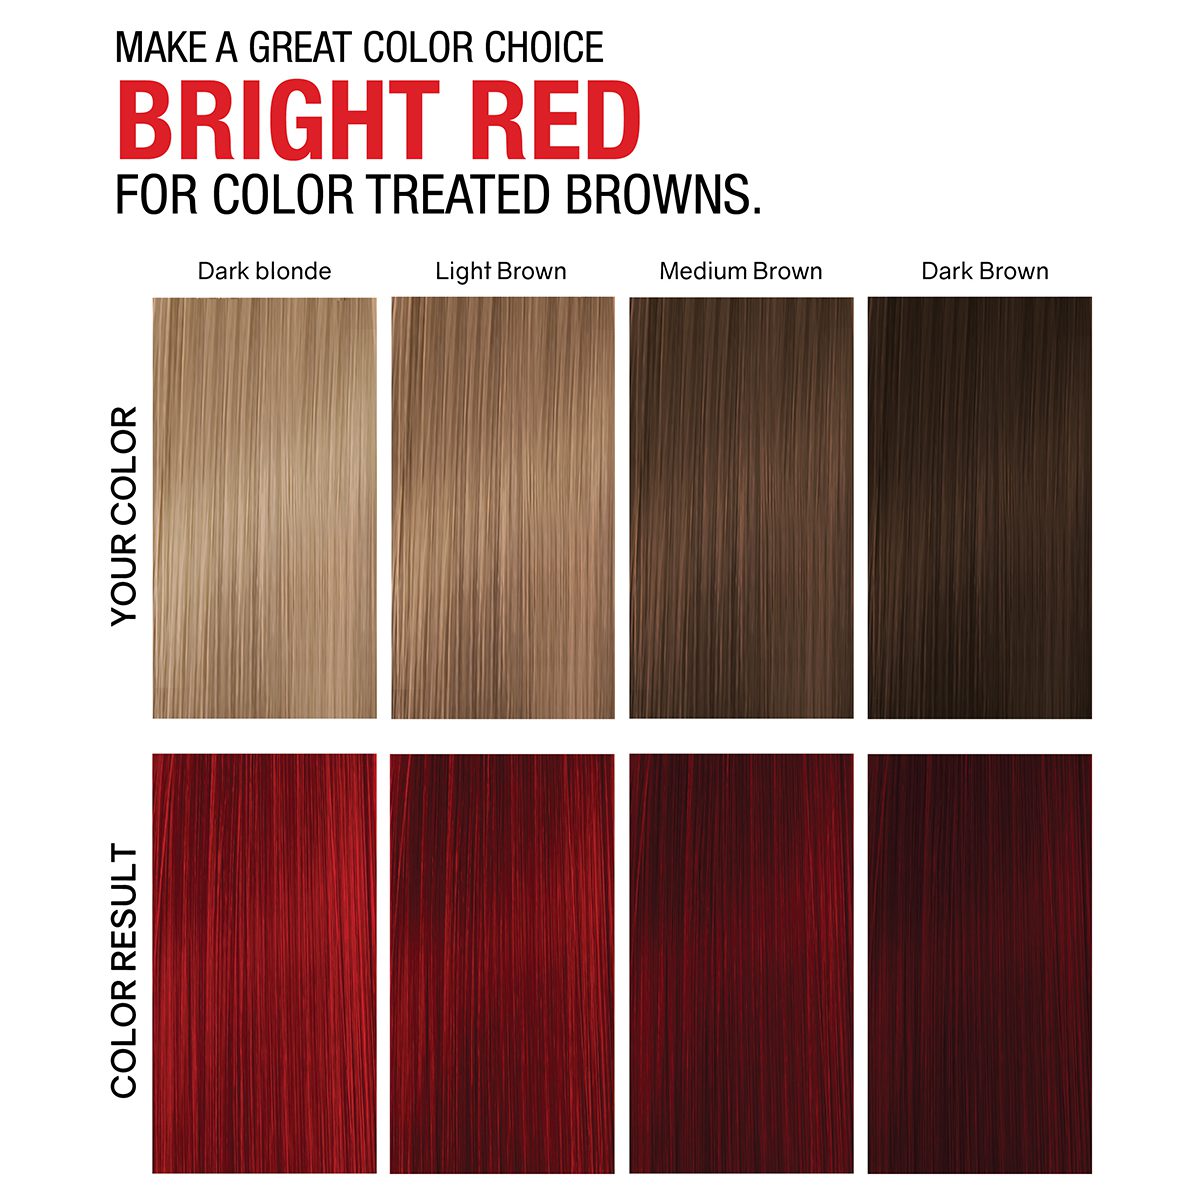 Bright Red for color treated browns.